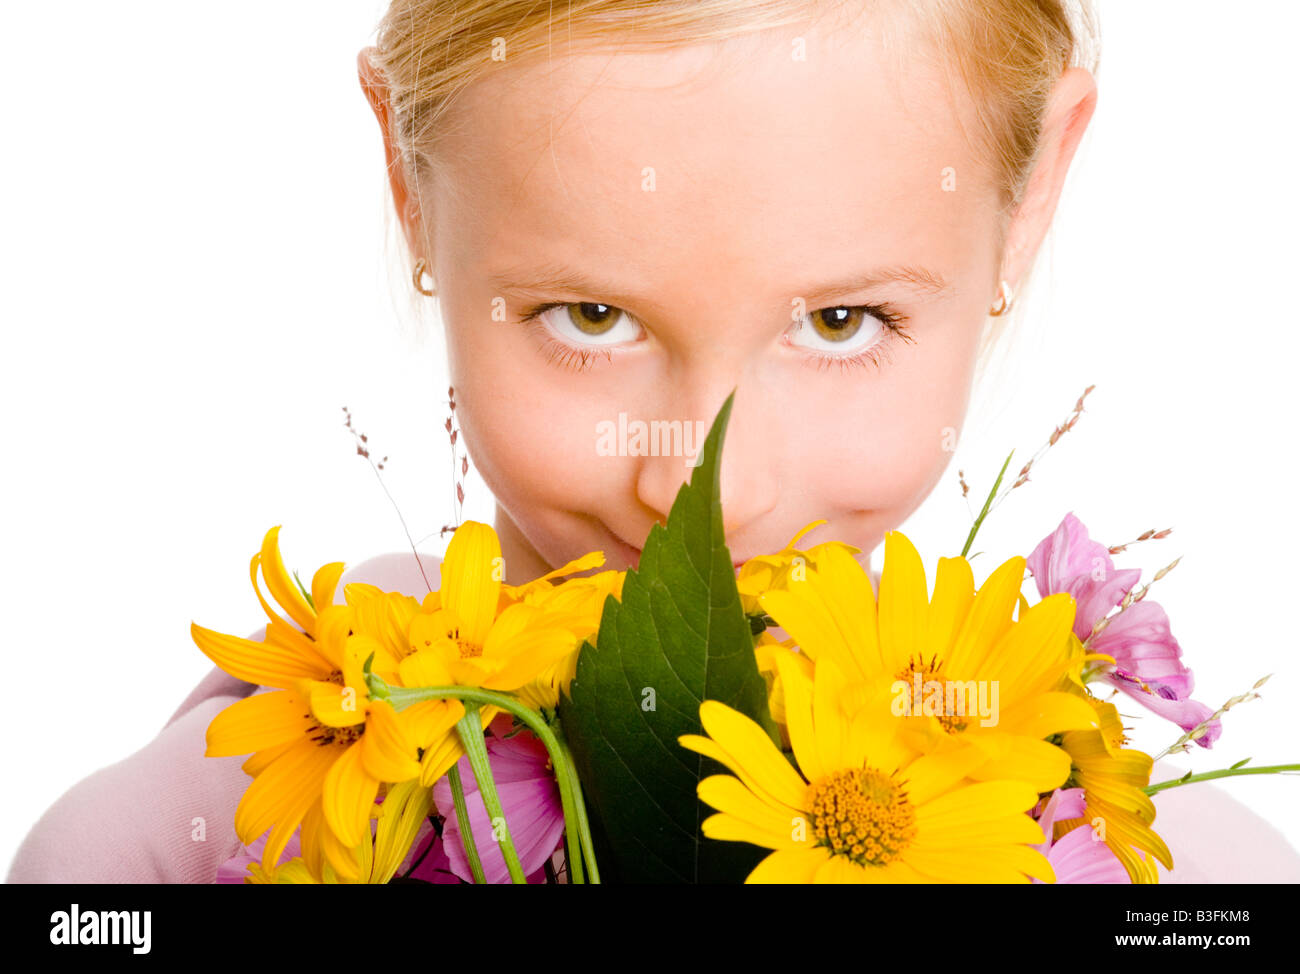 girl with flowers Stock Photo